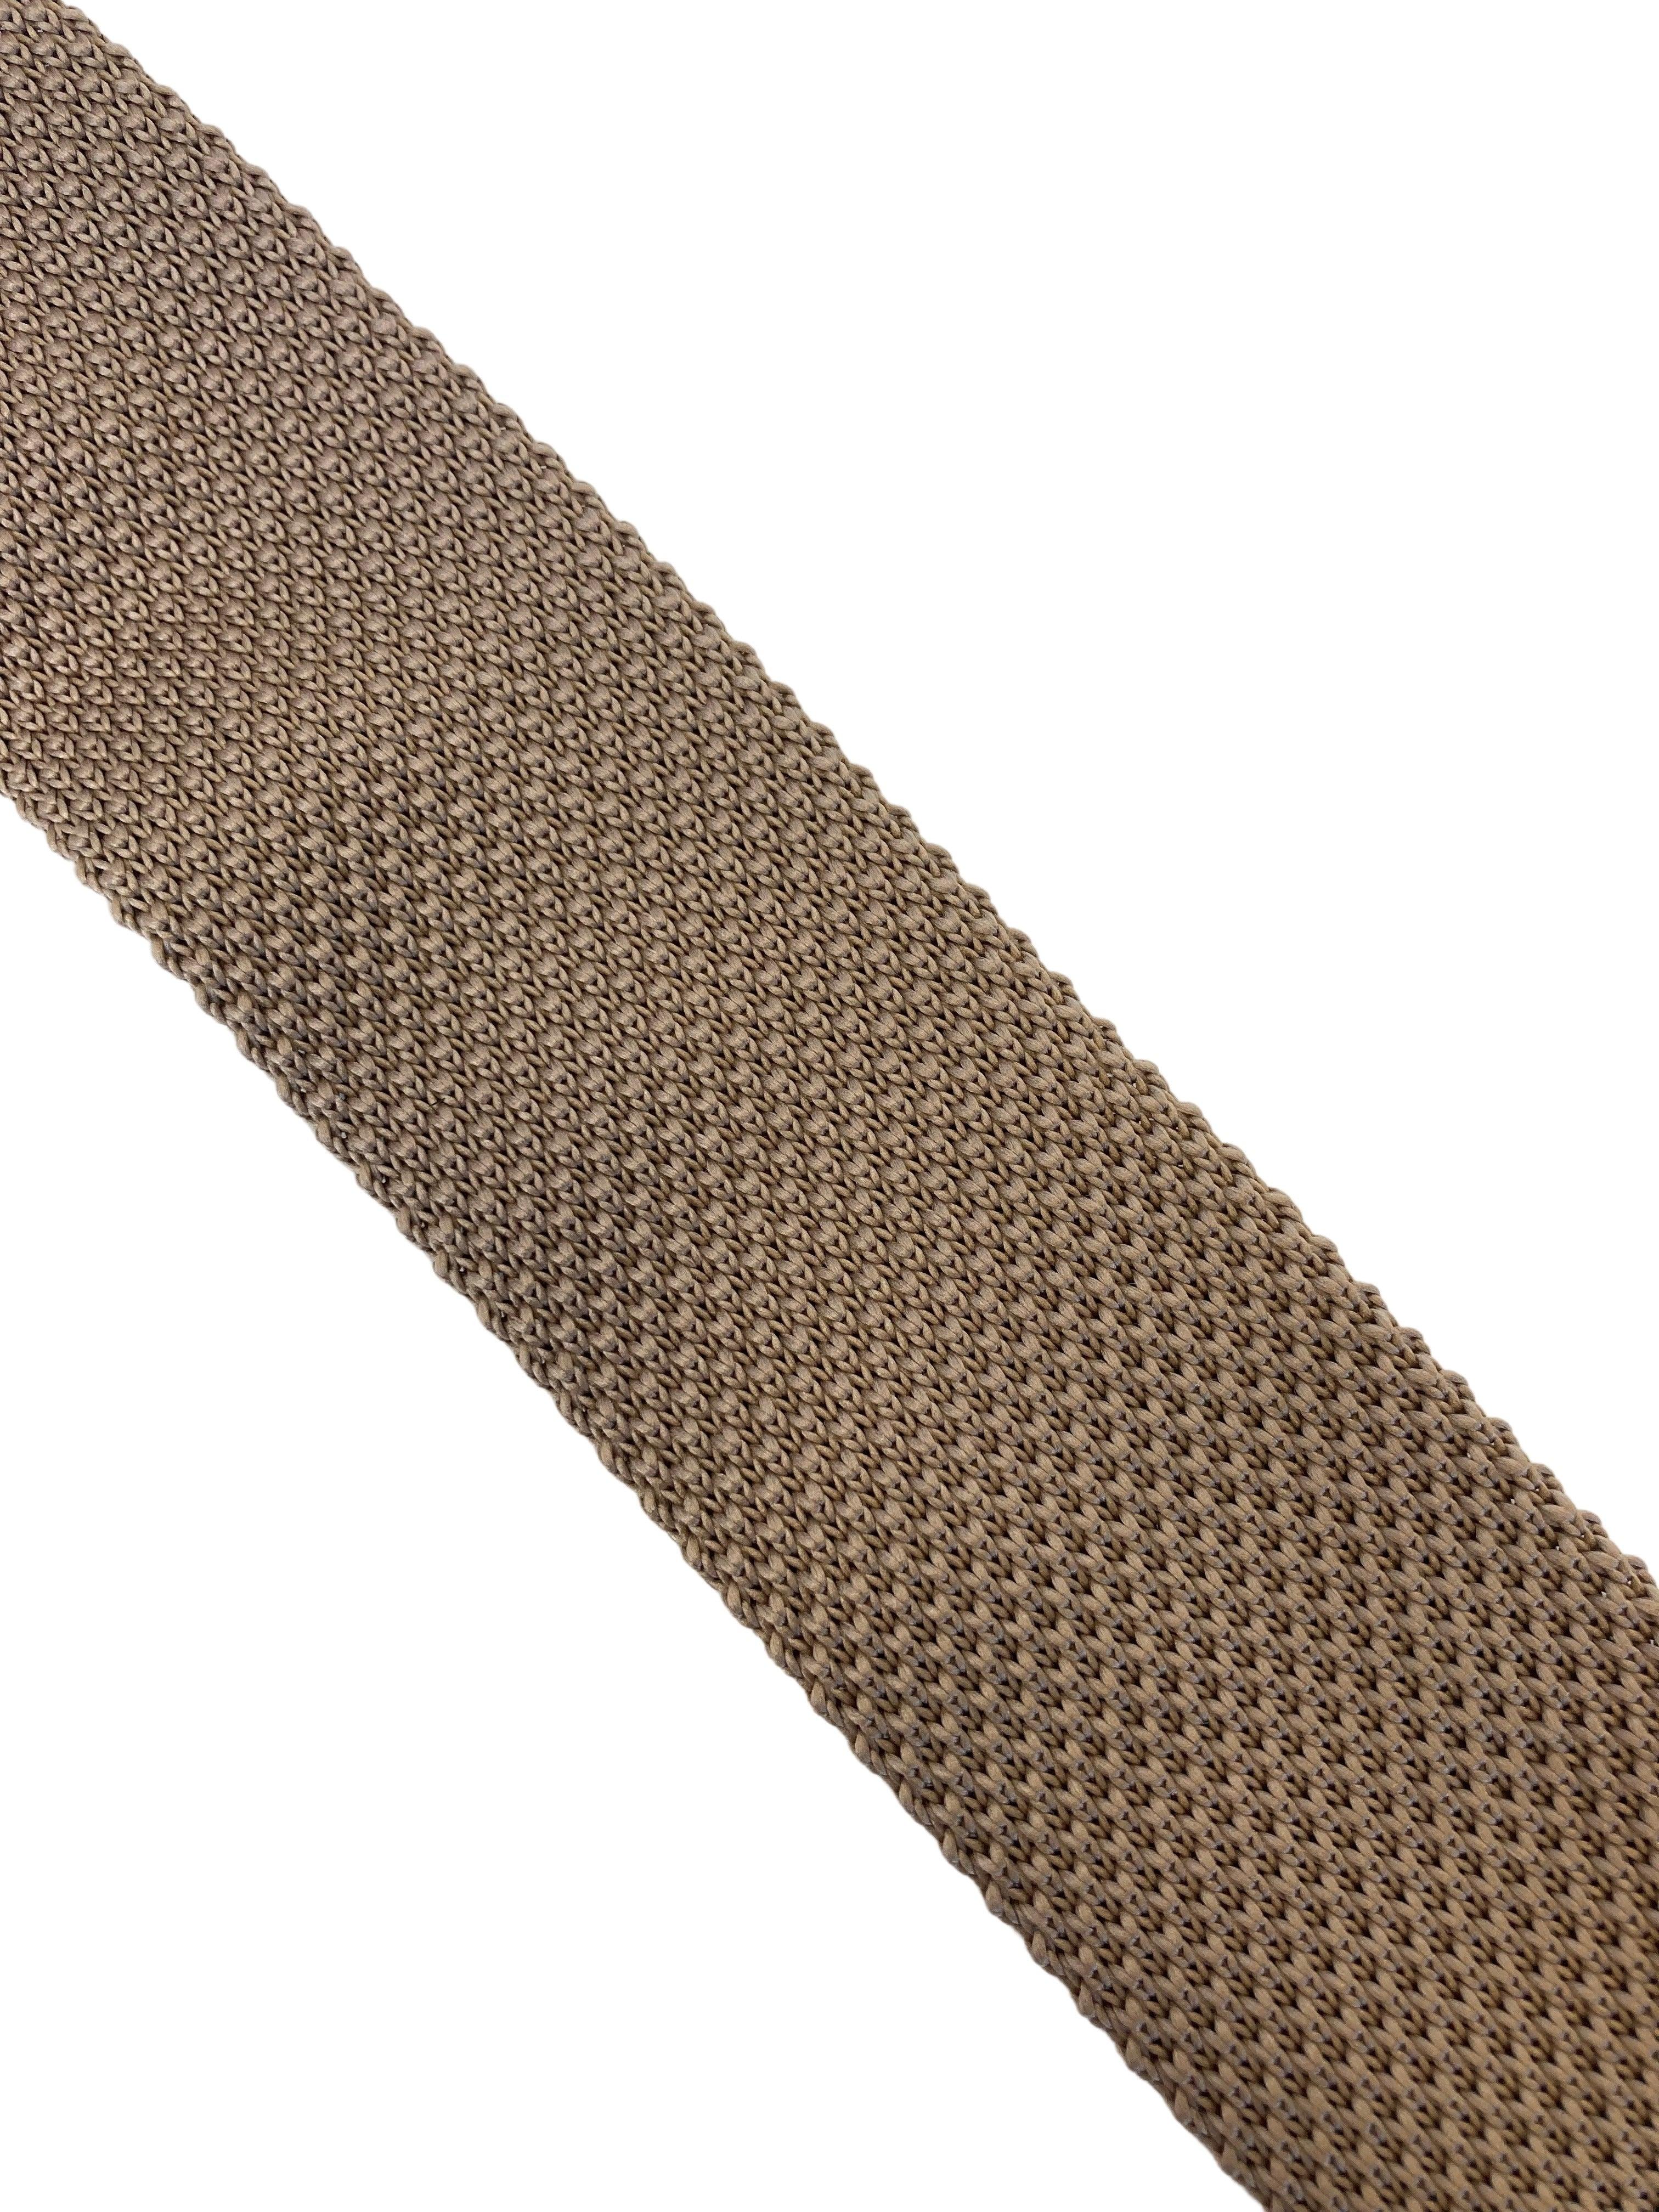 Skinny navy blue and brown polka spot knitted tie by Frederick Thomas FT1853 